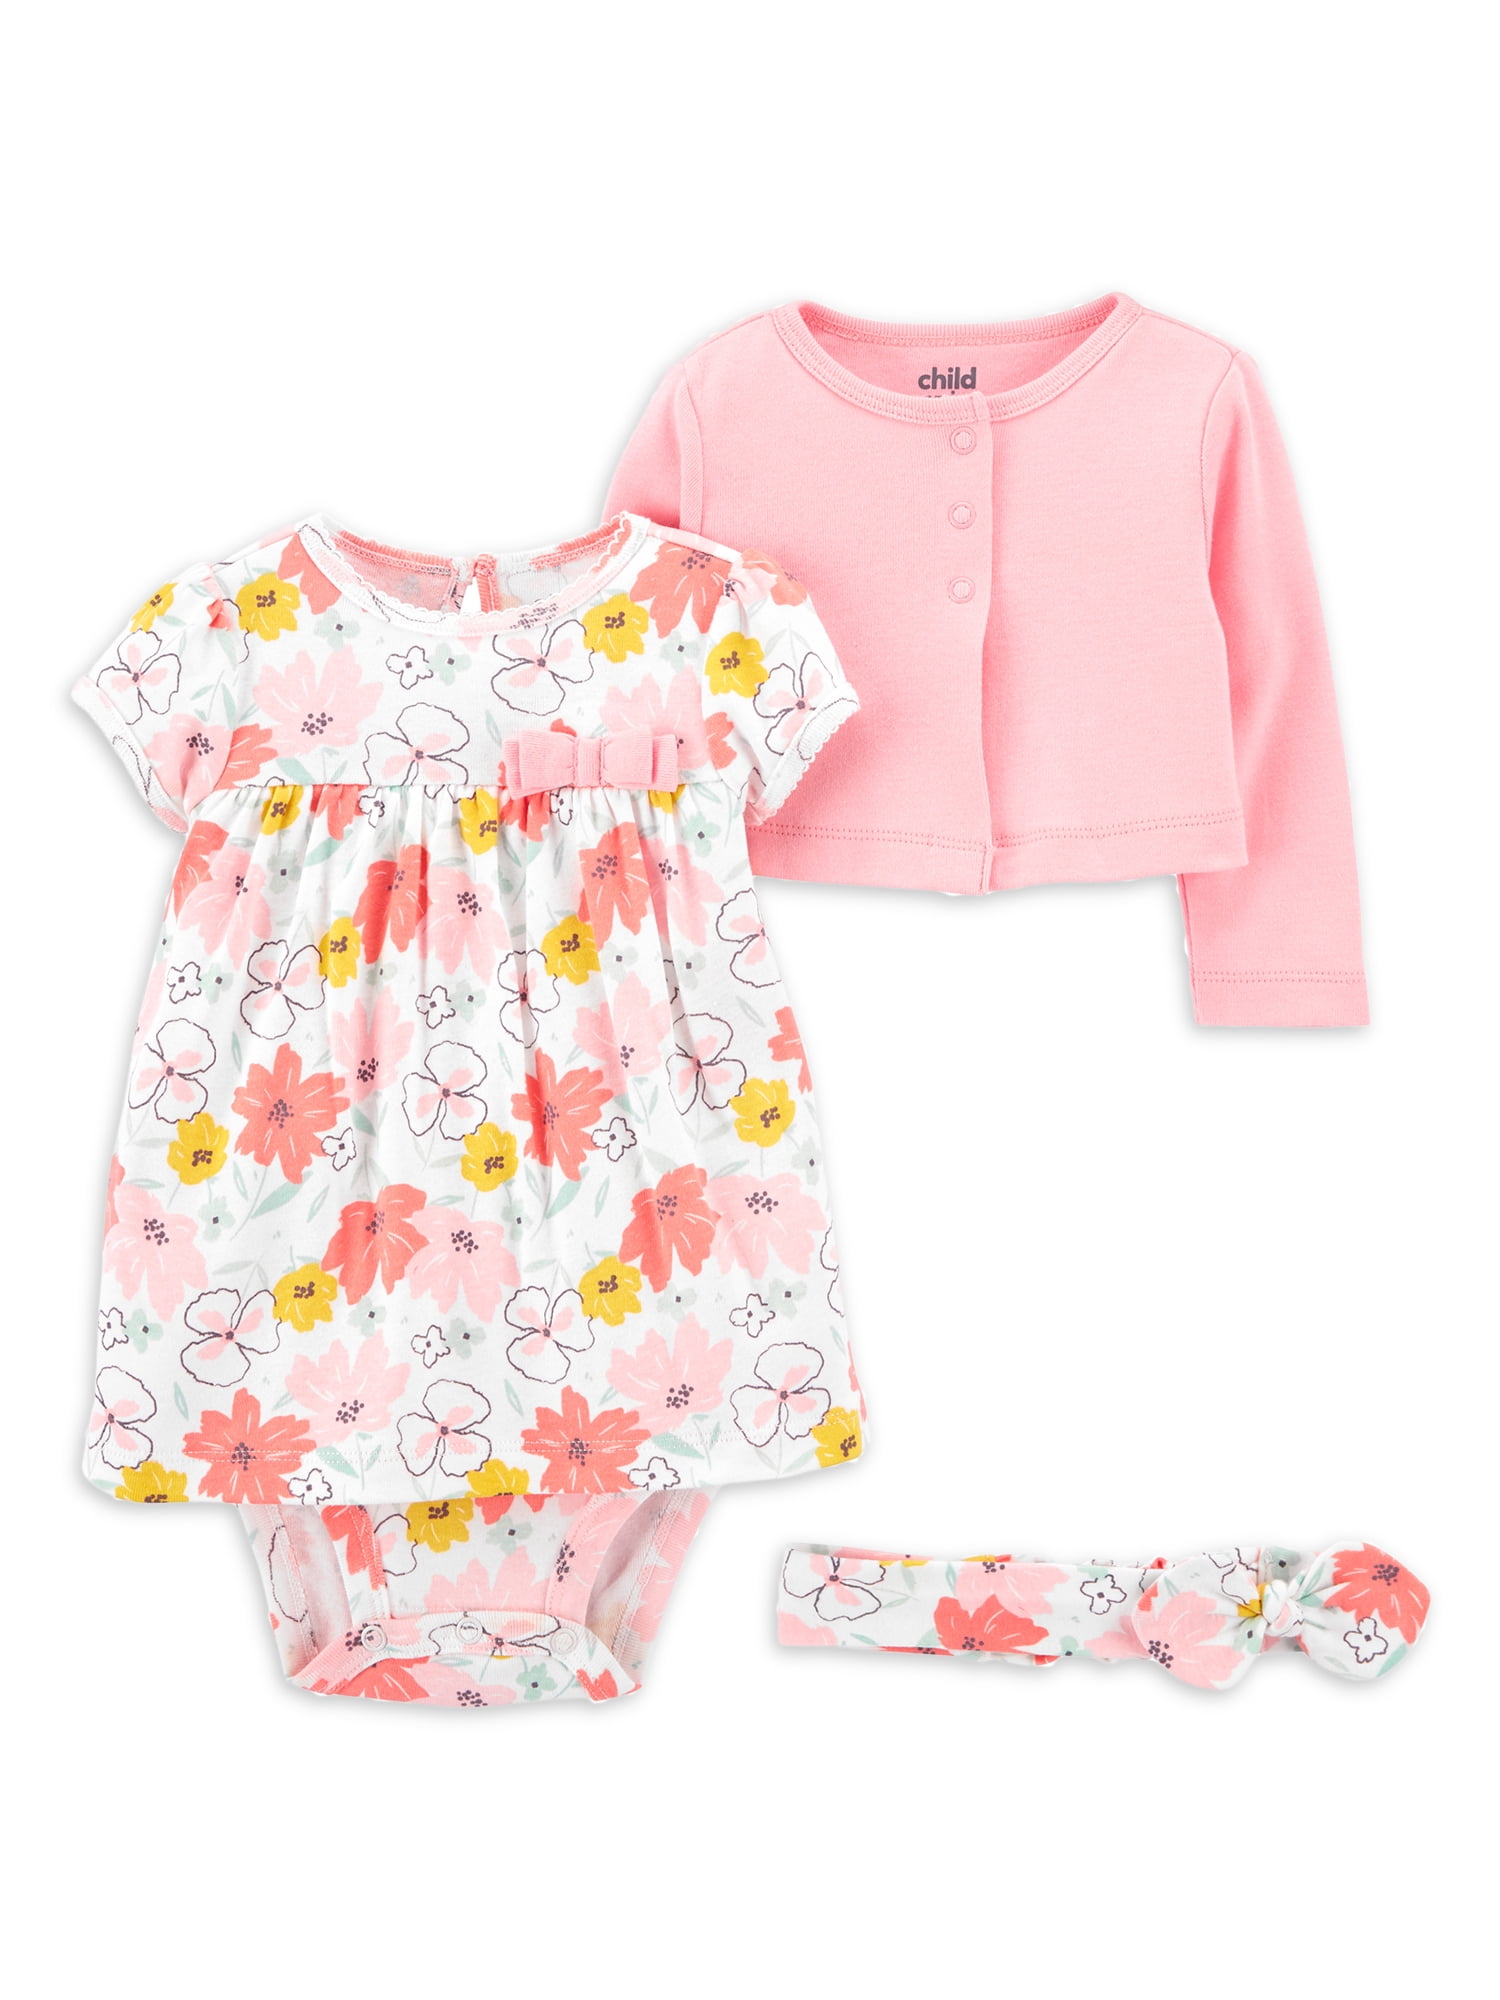 Baby - Live for Summer Carters Baby Girls 4 Piece Print PJ Set 6 Months 